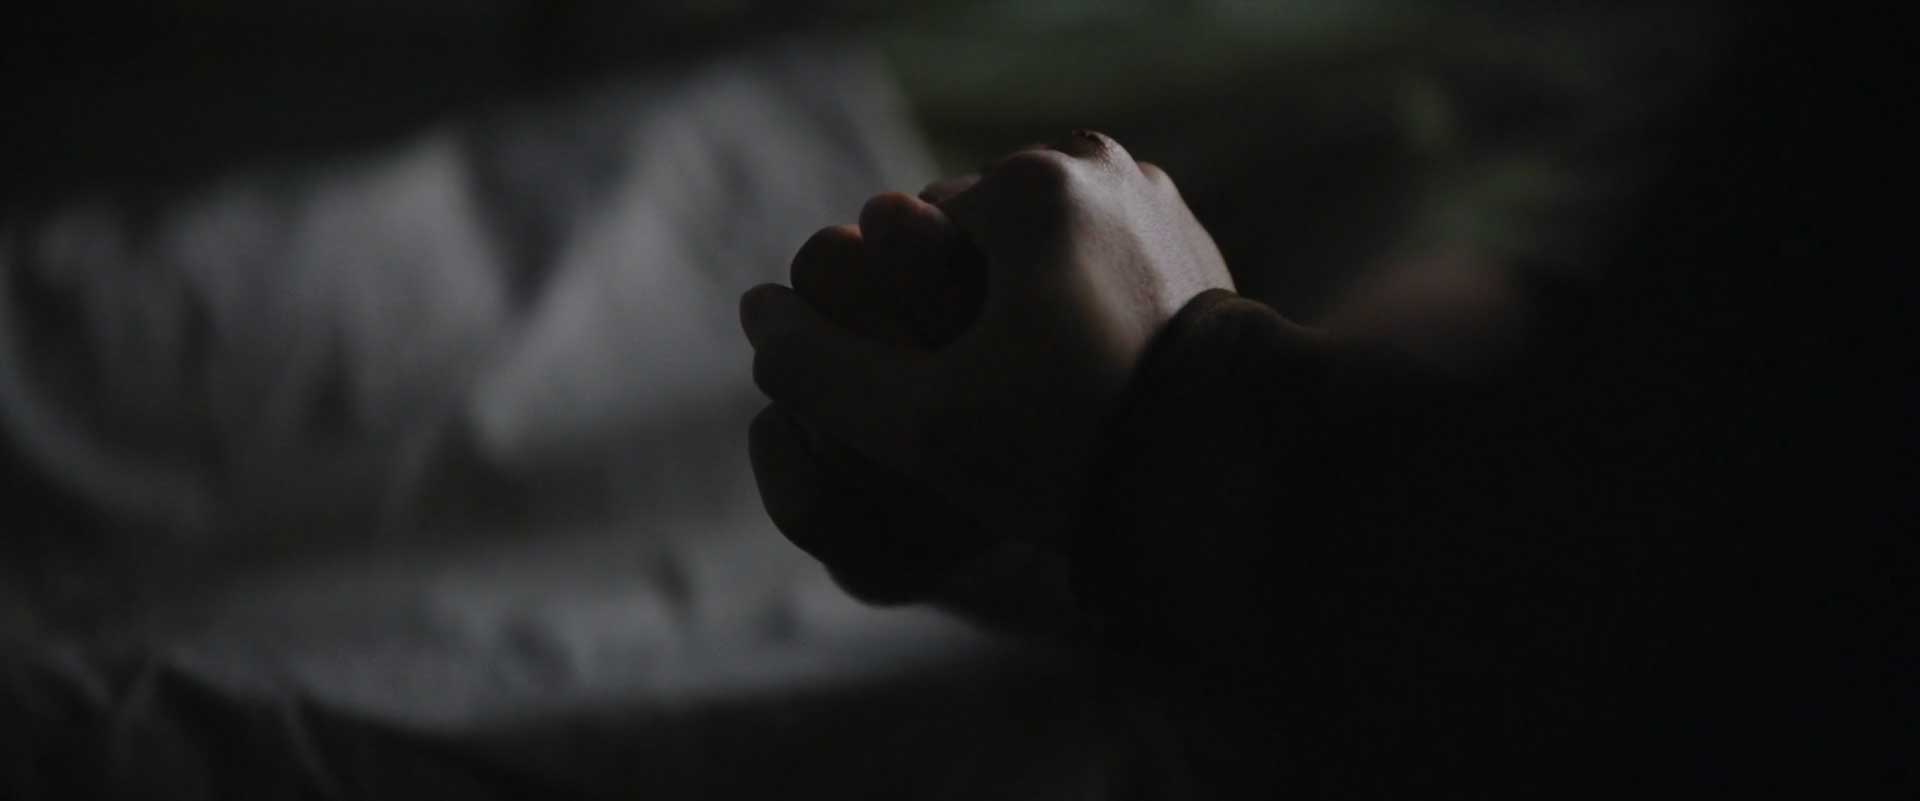 The hands of two characters in The Batman starring Robert Pattinson